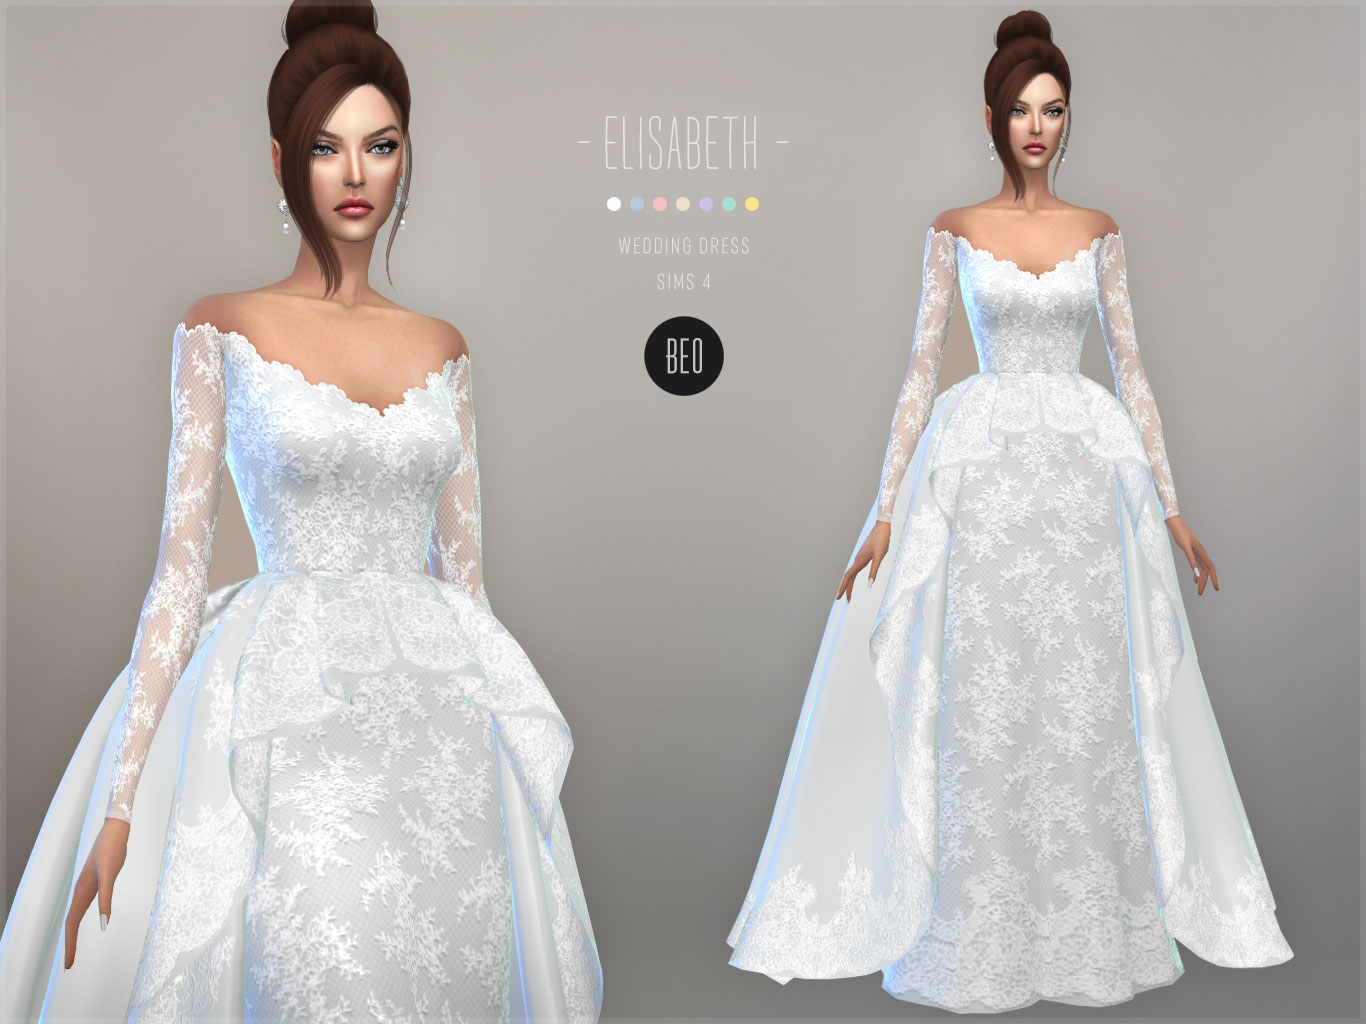 Wedding gown - Elisabeth for The Sims 4 by BEO